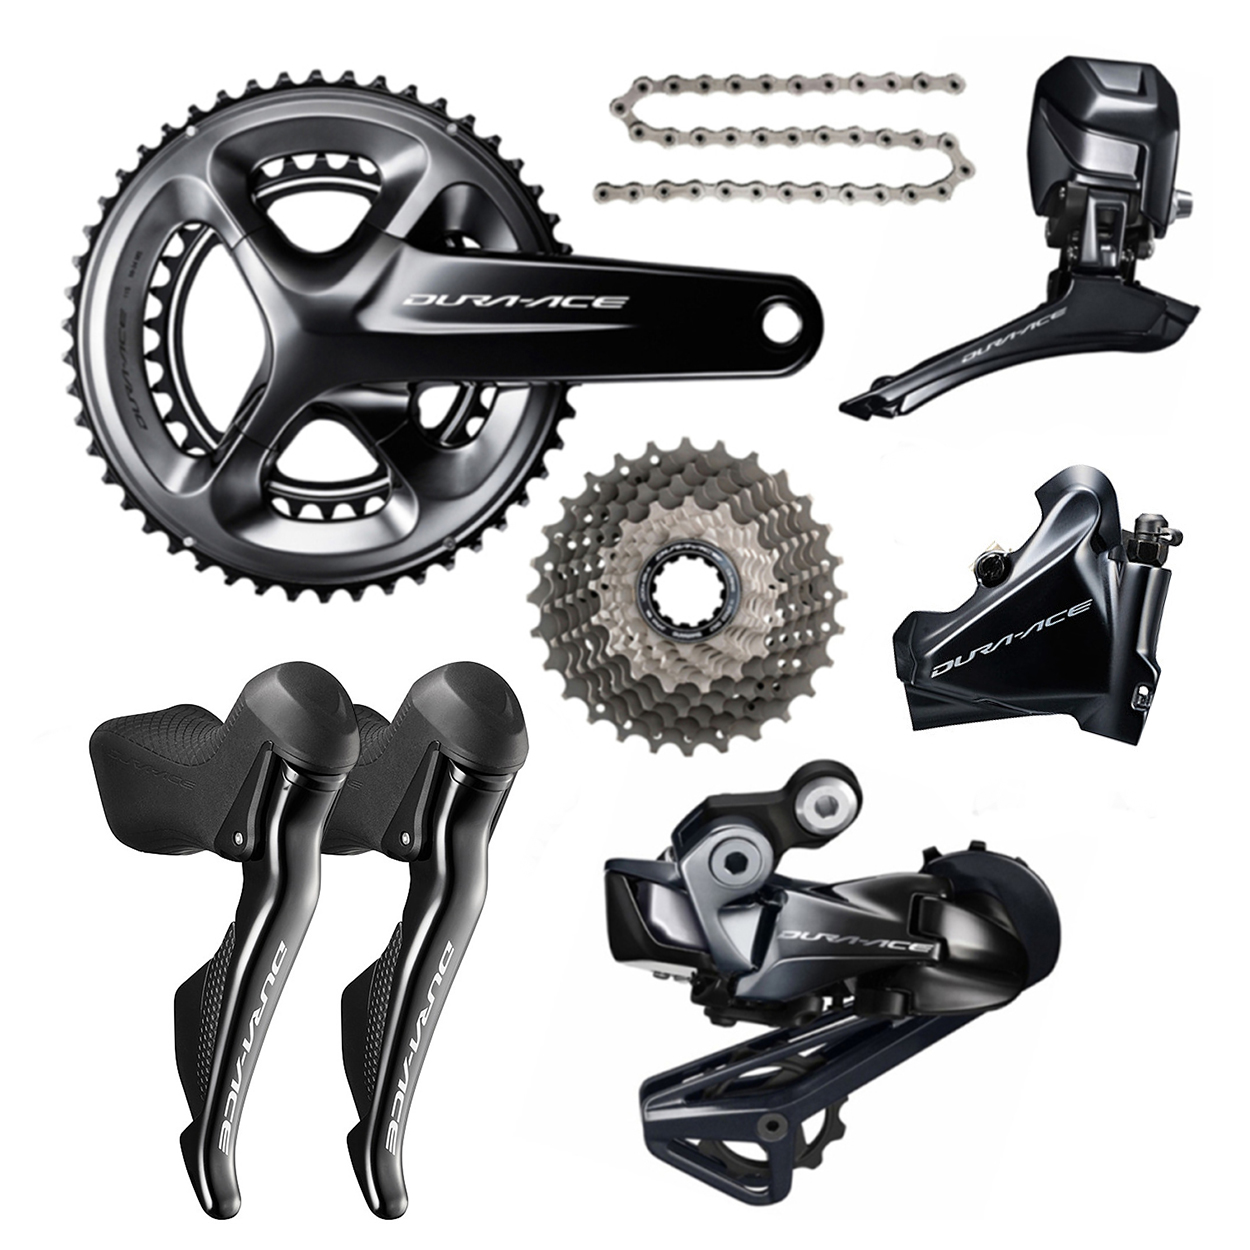 dura ace groupset for sale